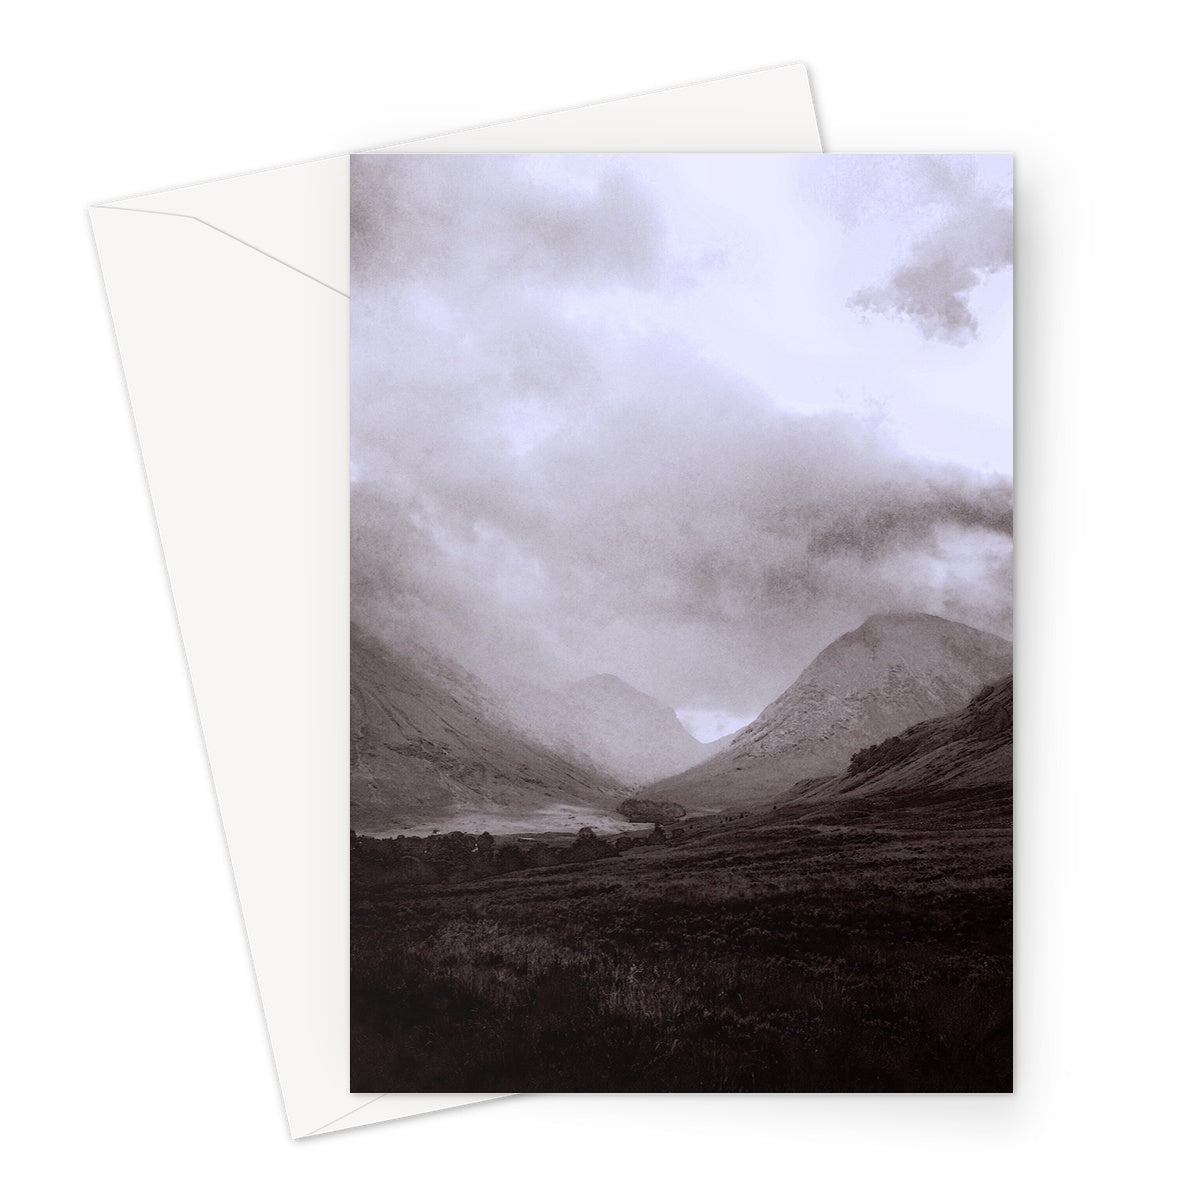 Glencoe Mist Art Gifts Greeting Card-Greetings Cards-Glencoe Art Gallery-A5 Portrait-1 Card-Paintings, Prints, Homeware, Art Gifts From Scotland By Scottish Artist Kevin Hunter